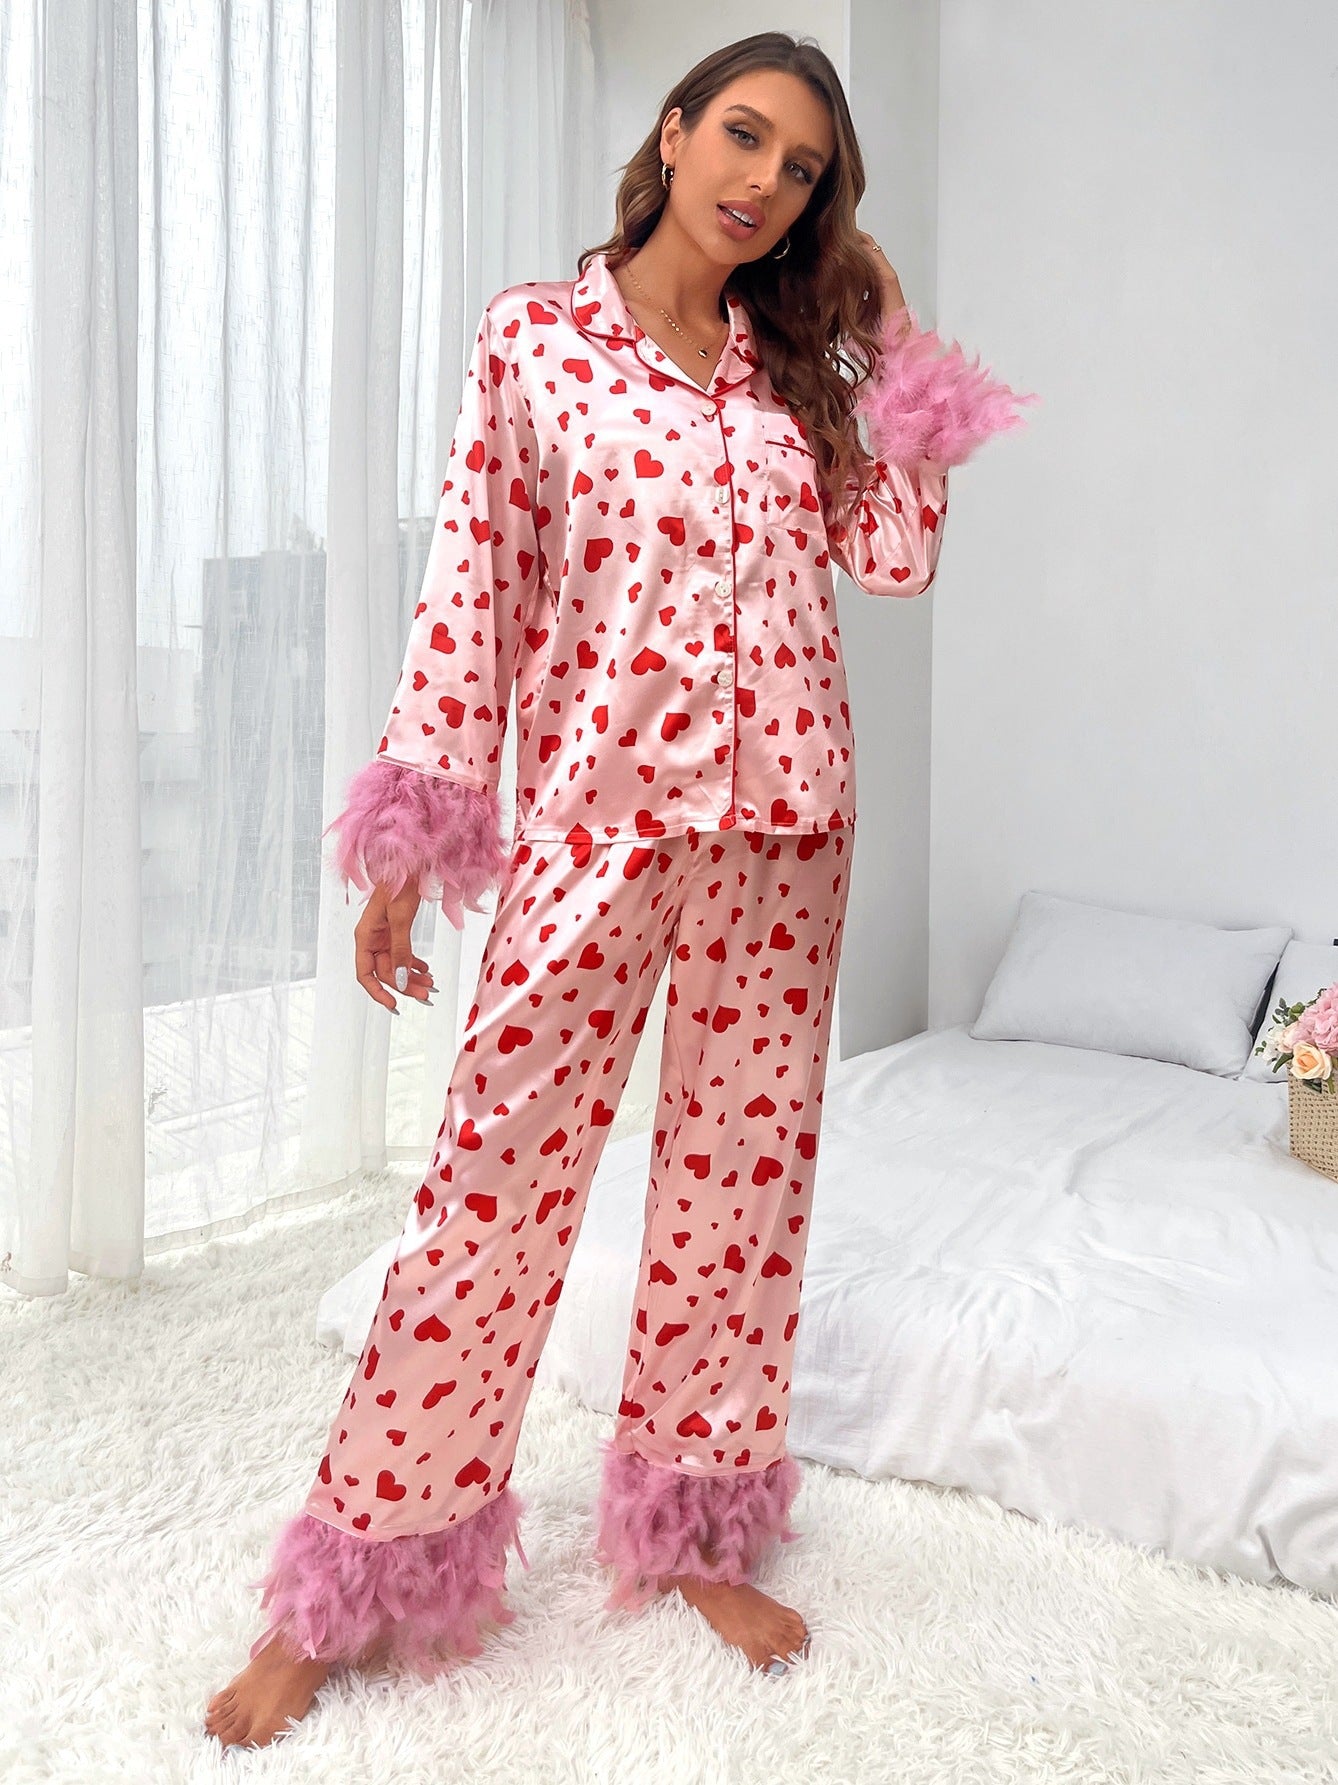 Women's Clothing Valentine's Day Sweet Loving Heart Printed Casual Suit Pajamas, Valentine's Day decor, Romantic home accents, Heart-themed decorations, Cupid-inspired ornaments, Love-themed party supplies, Red and pink decor, Valentine's Day table settings, Romantic ambiance accessories, Heart-shaped embellishments, Valentine's Day home embellishments